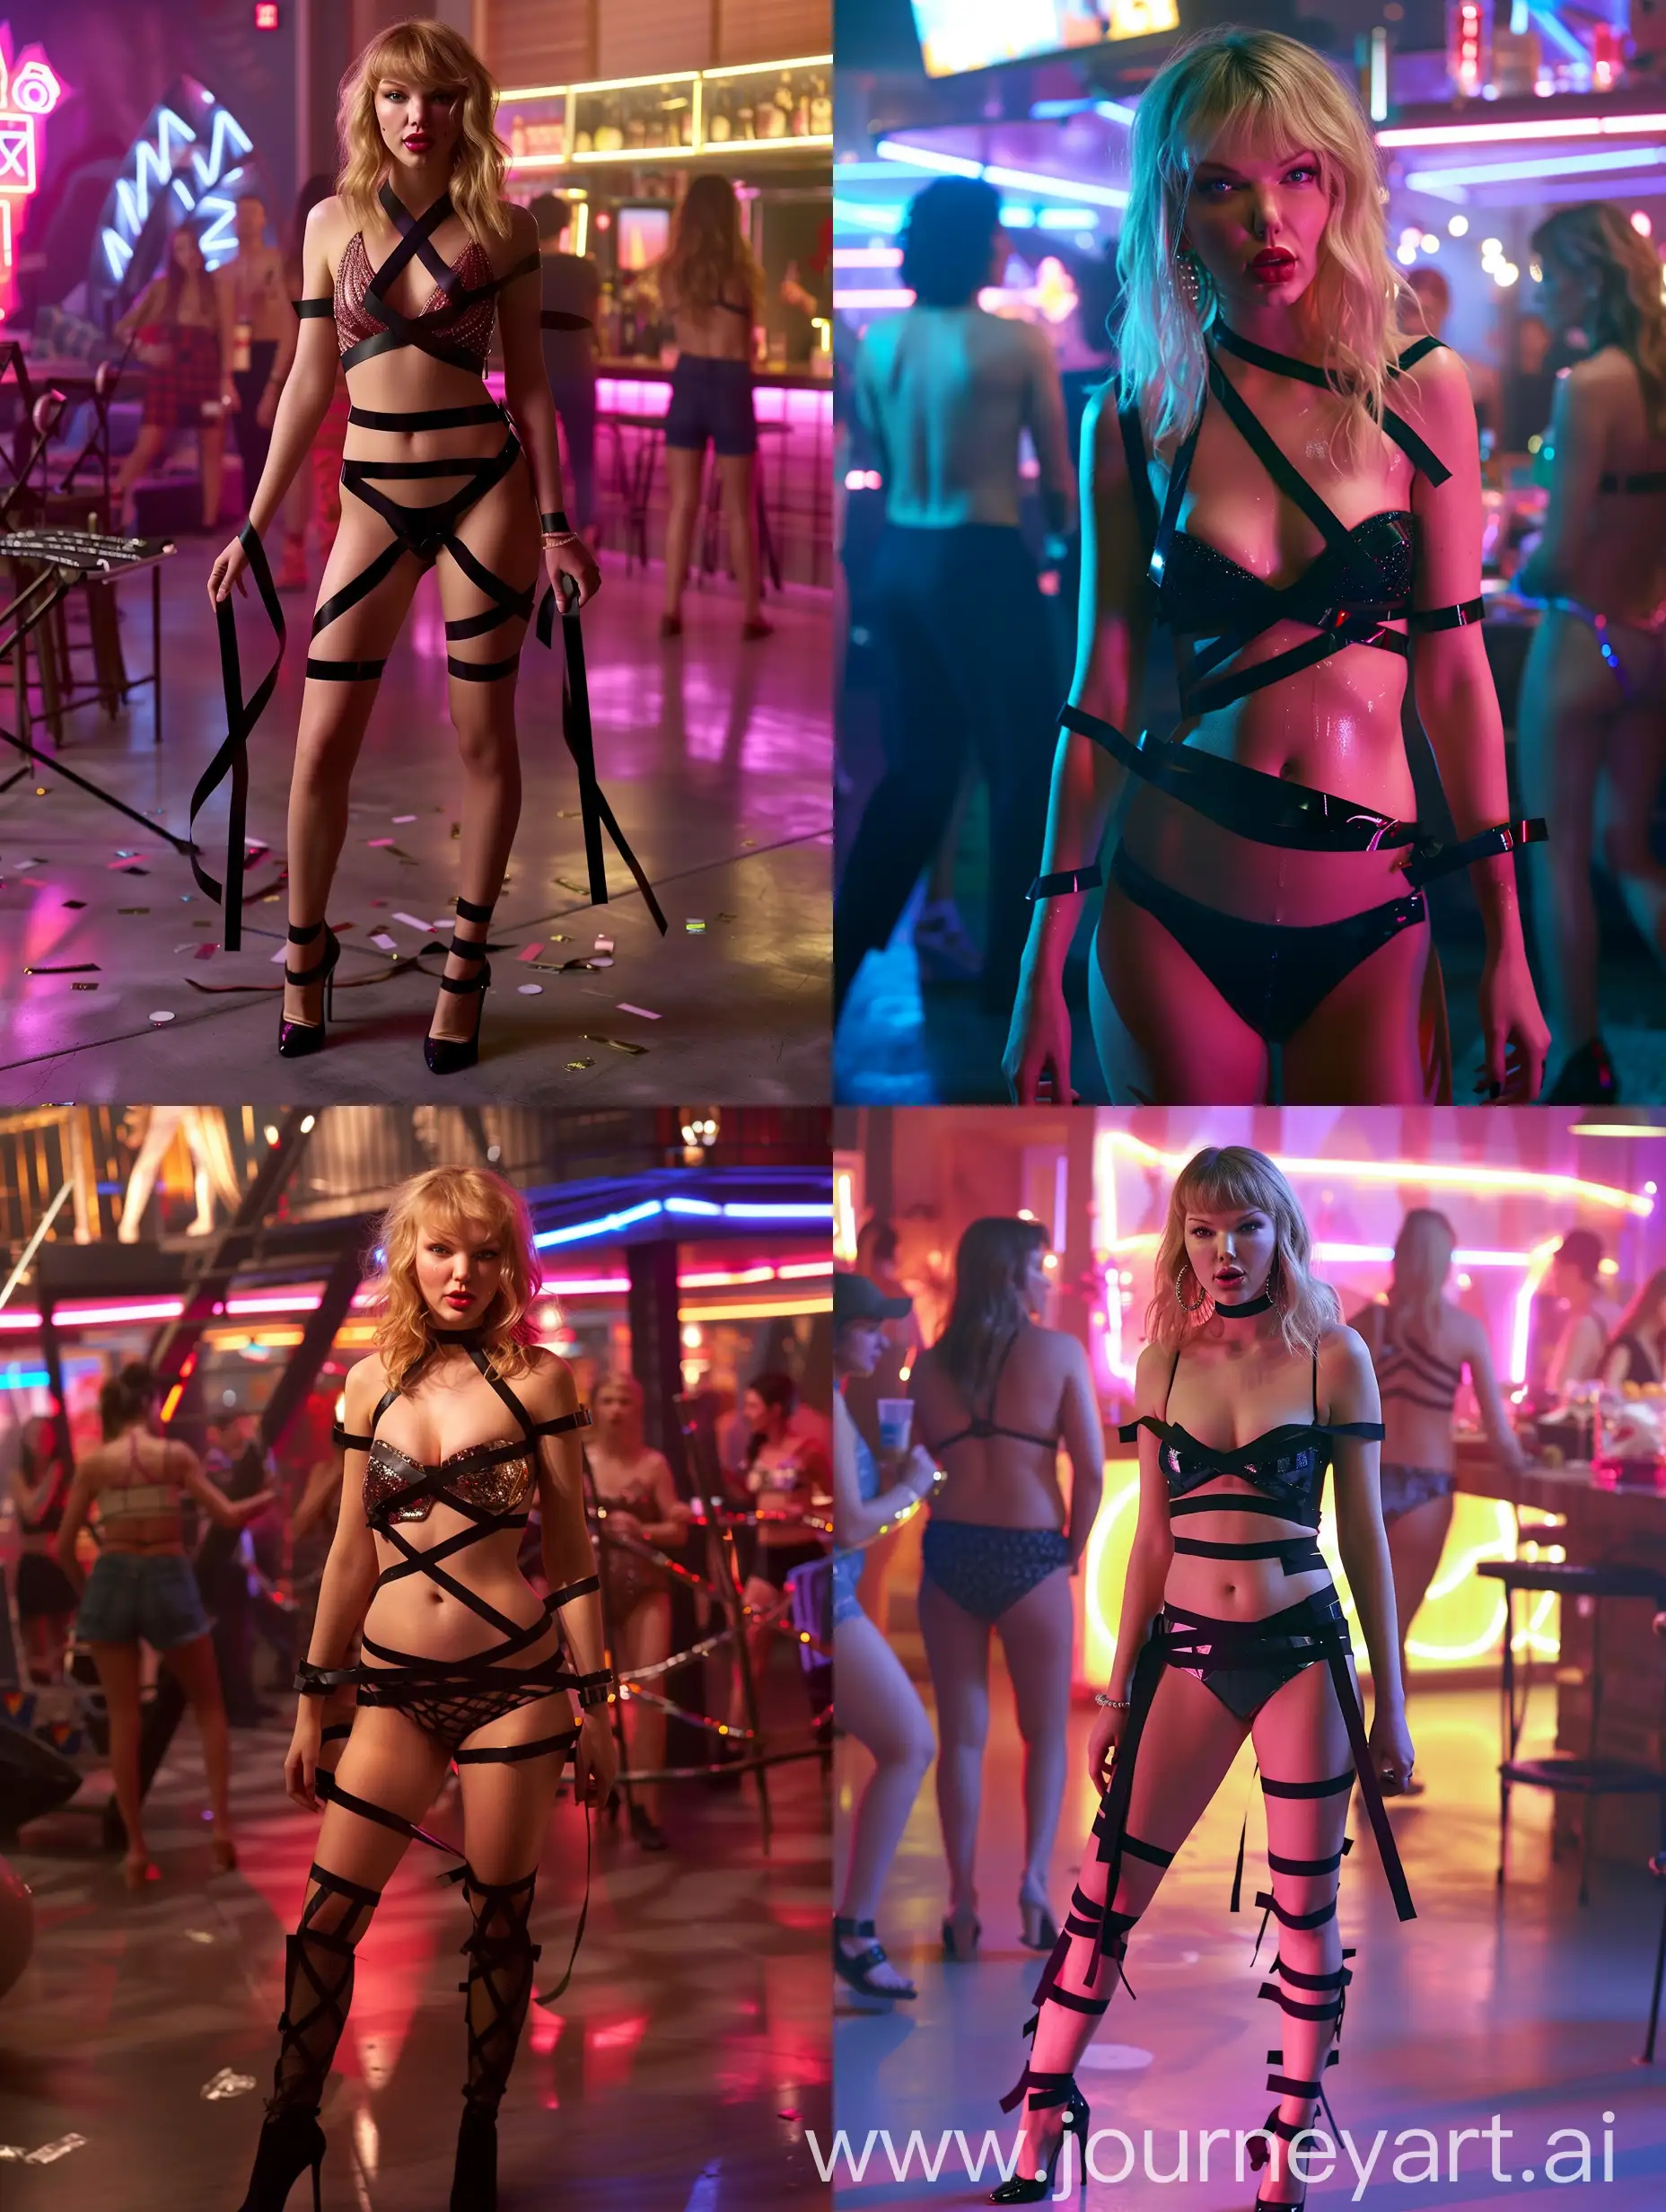 movie still, busy penthouse party in background, Taylor Swift wearing strips of black sticky tape, black high heels, neon lights, blond hair, pink lipstick, fit abdomen